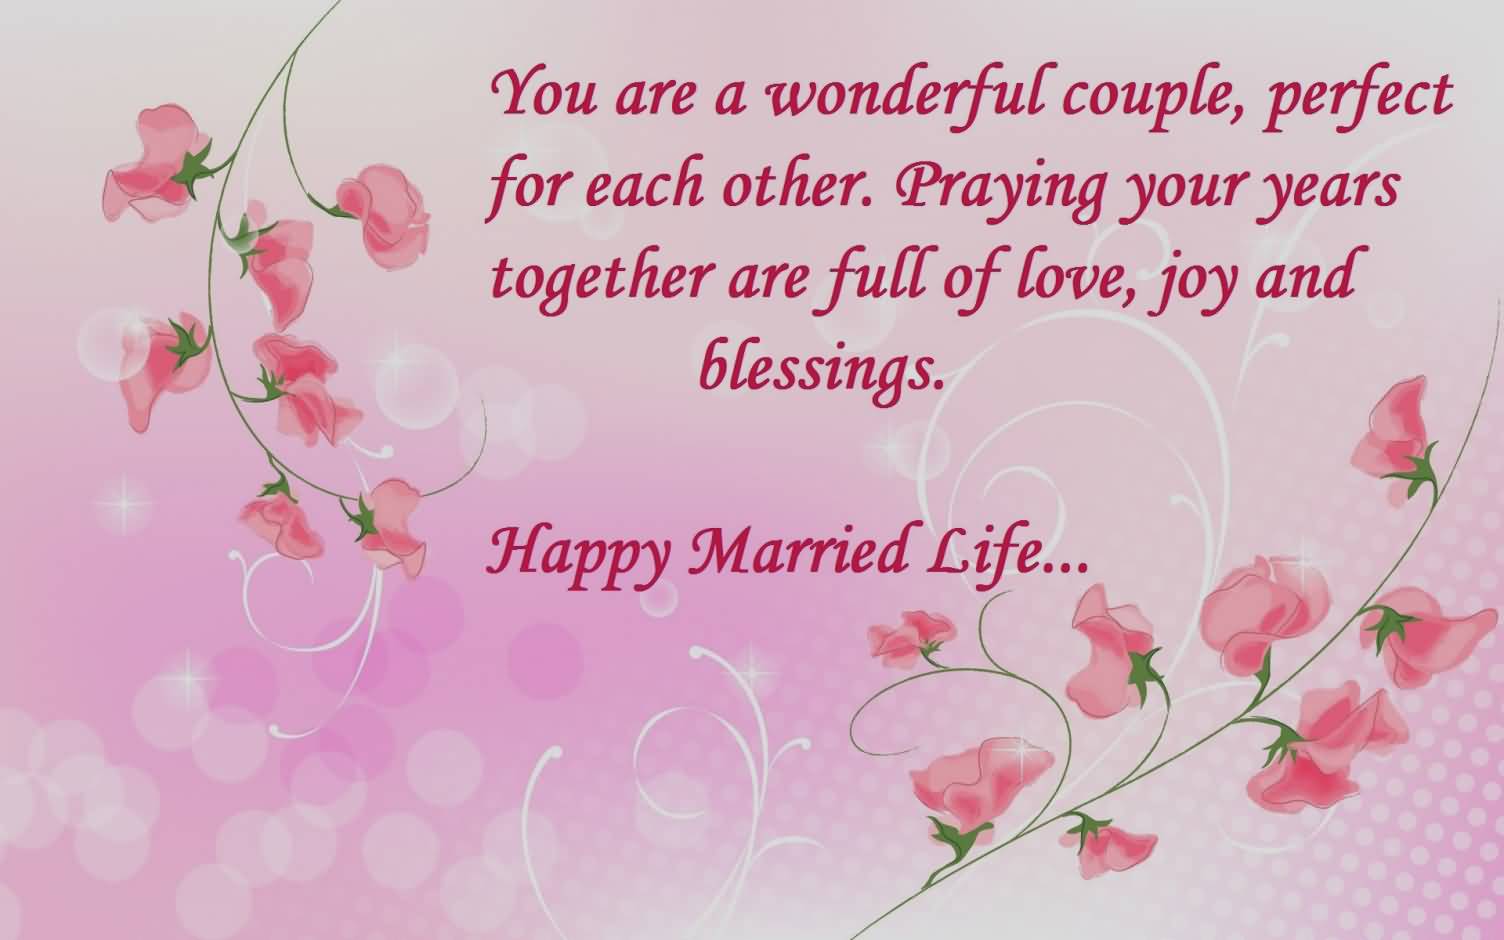 Wedding Wishes Images Free Download You Are A Wonderful Couple